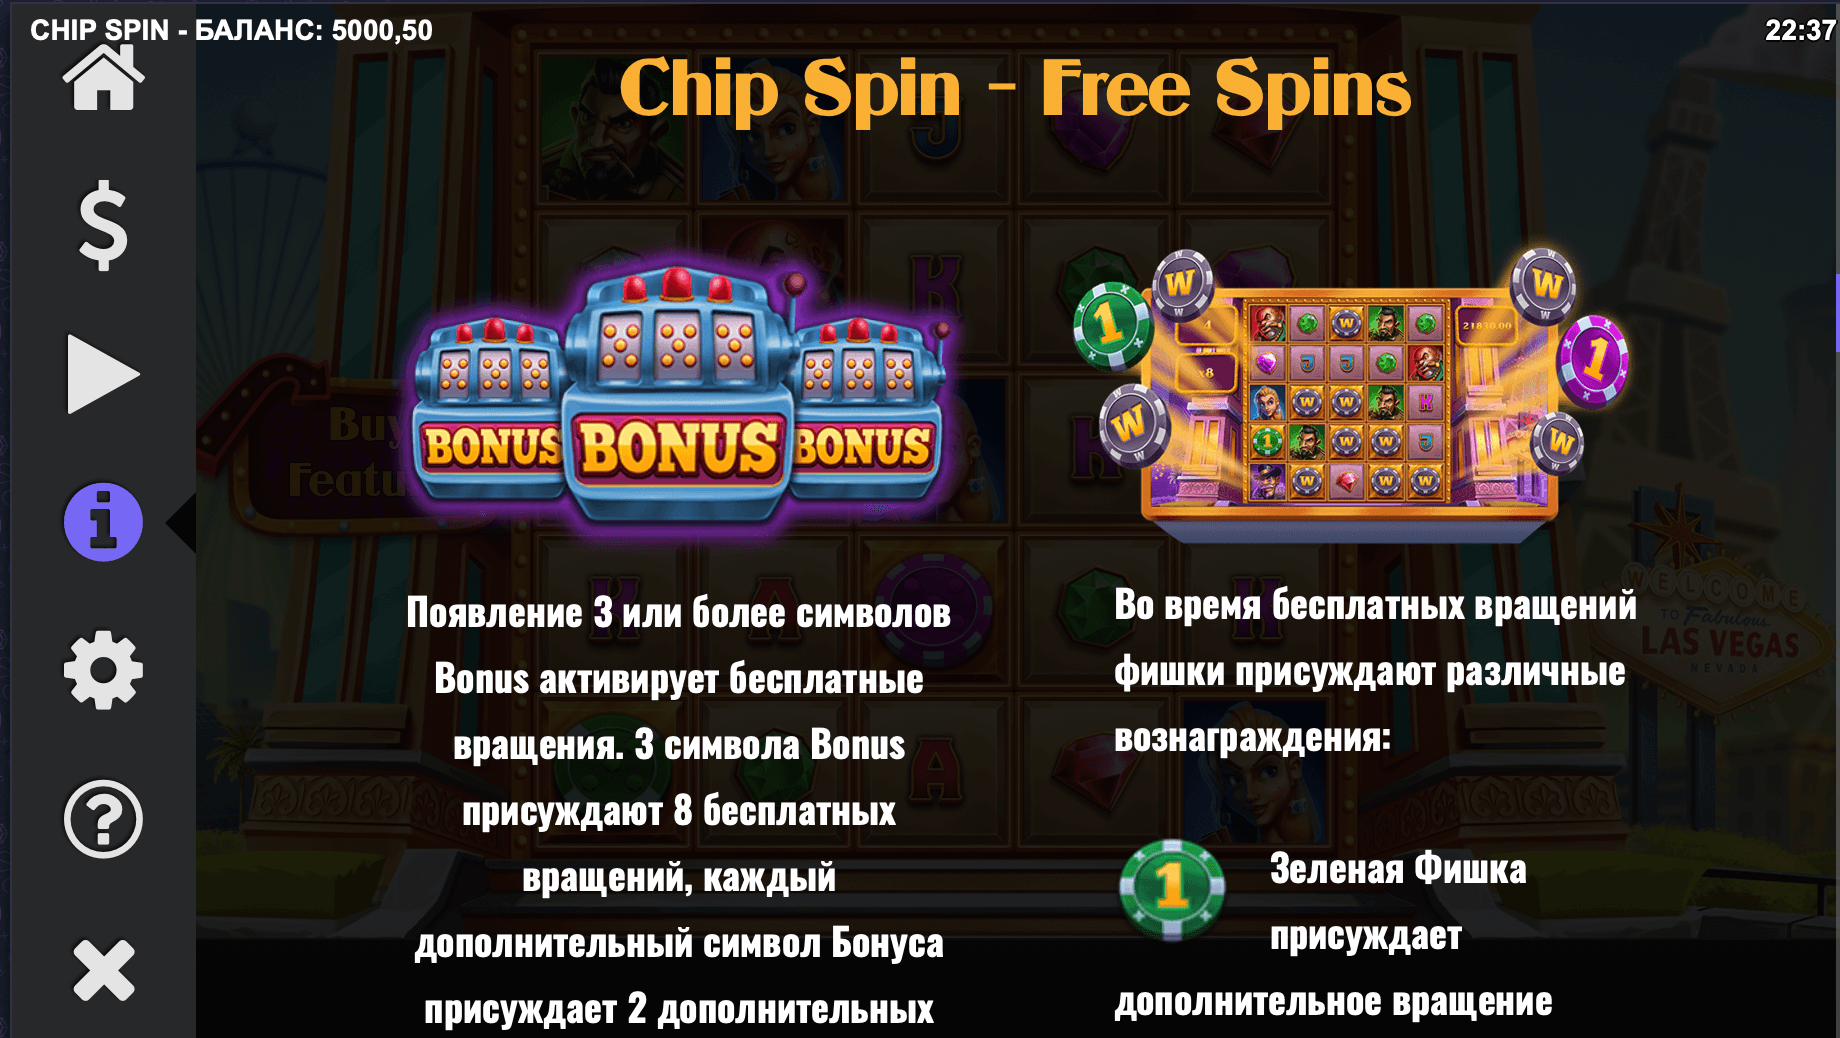 Chip Spin Spel proces